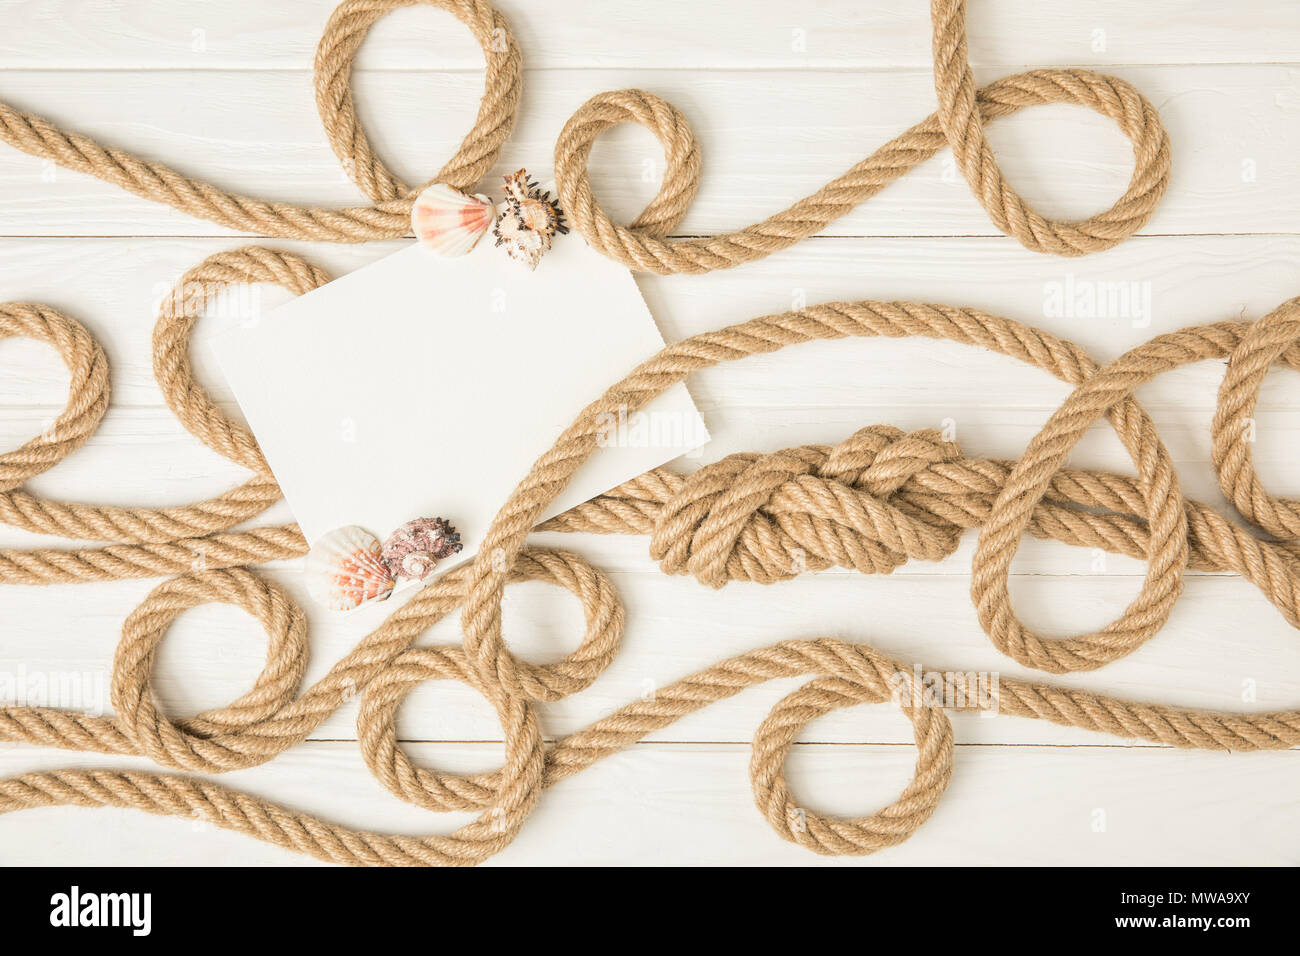 top view of empty paper with seashells on brown nautical knotted ropes on white wooden surface Stock Photo